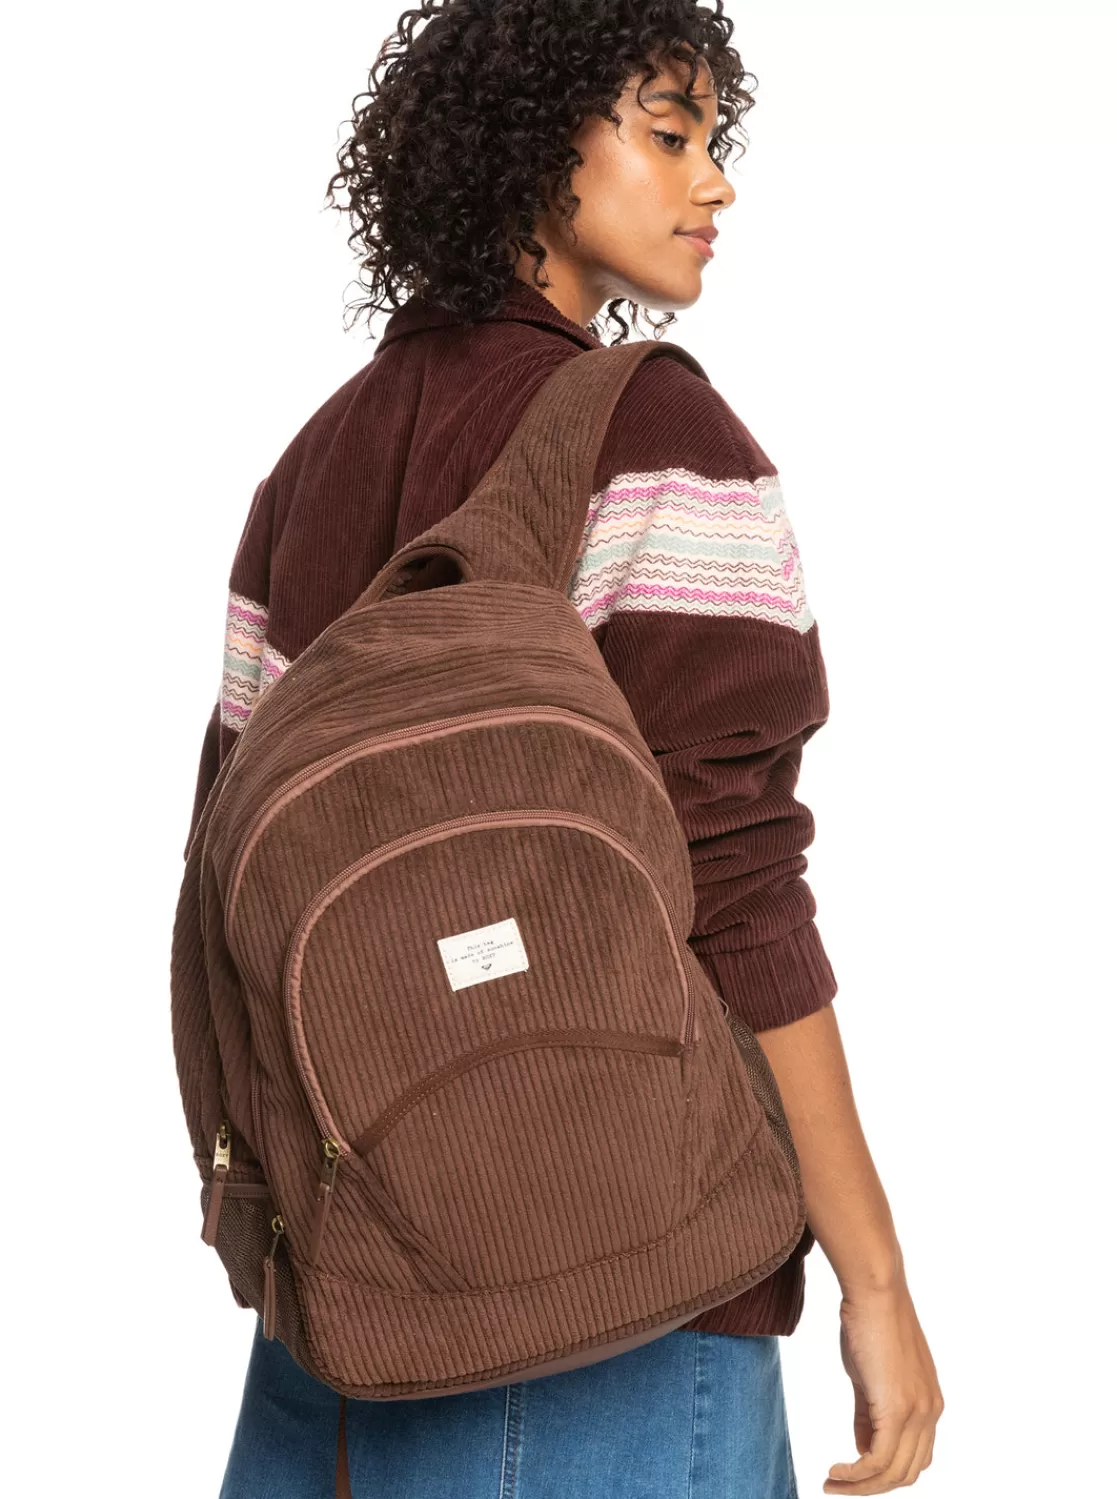 Cozy Nature Large Corduroy Backpack-ROXY Best Sale